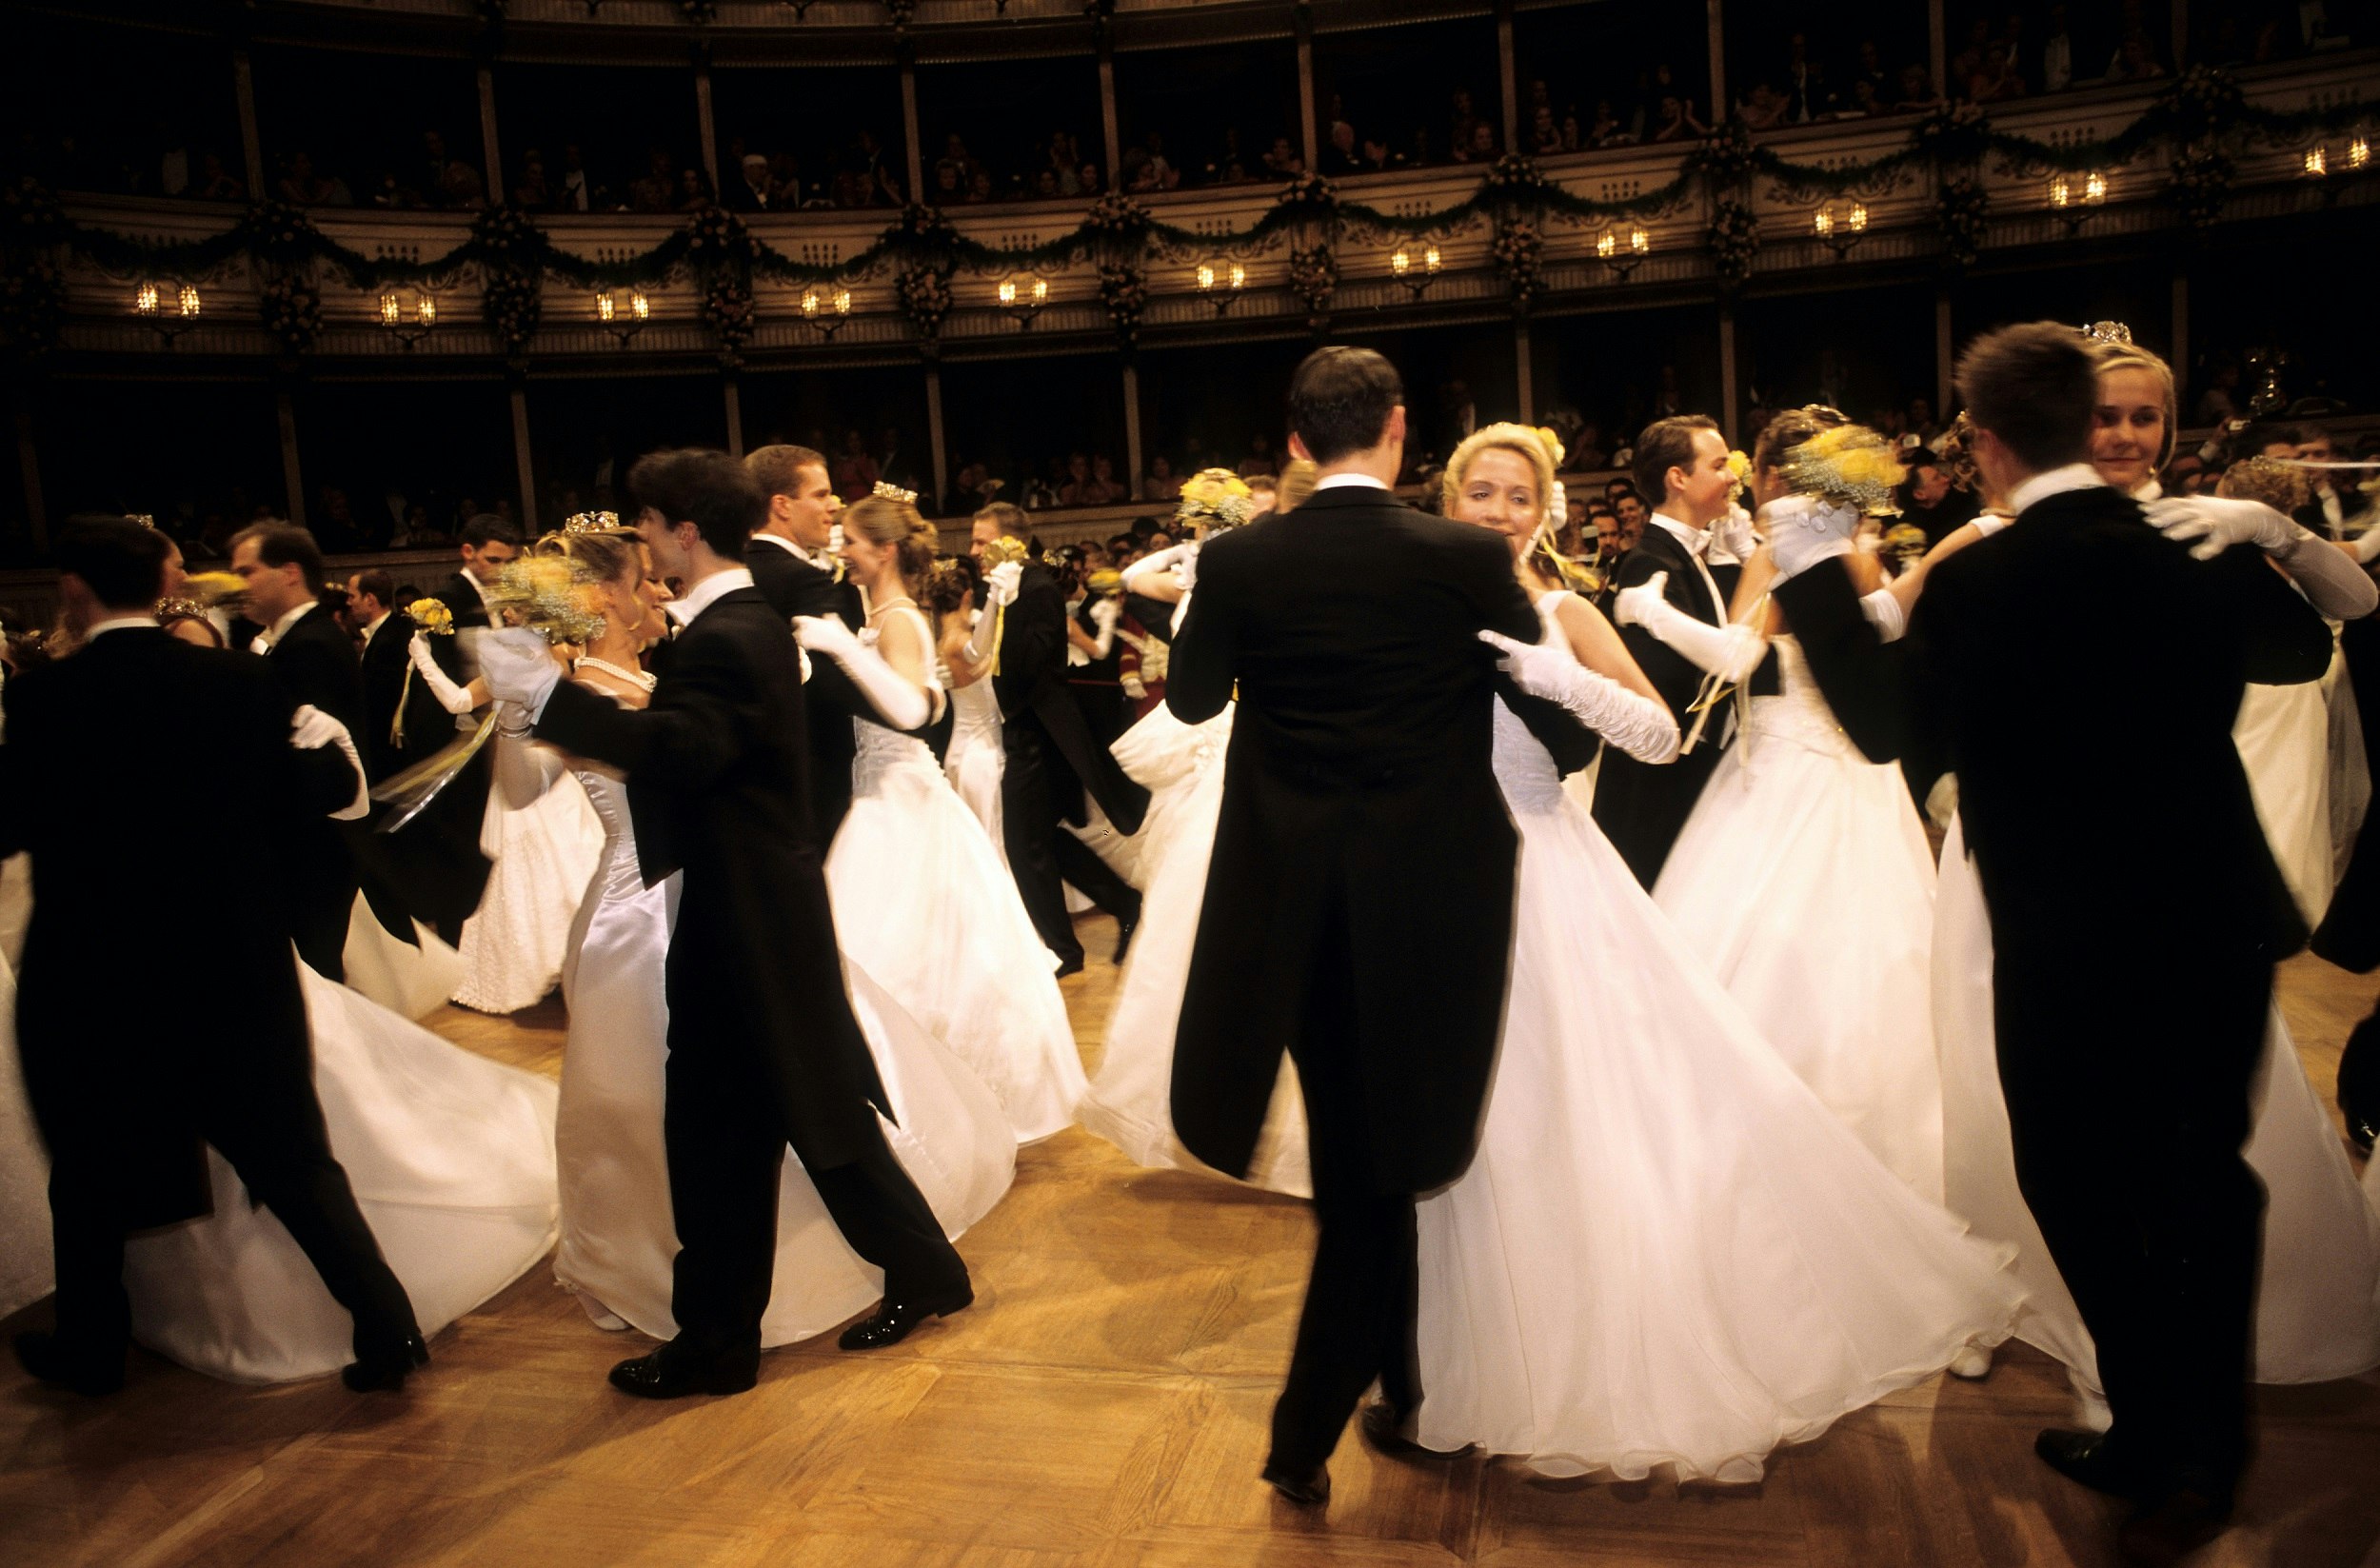 A blur of dancers moves around the dance floor, with men wearing black suits and women in white dresses